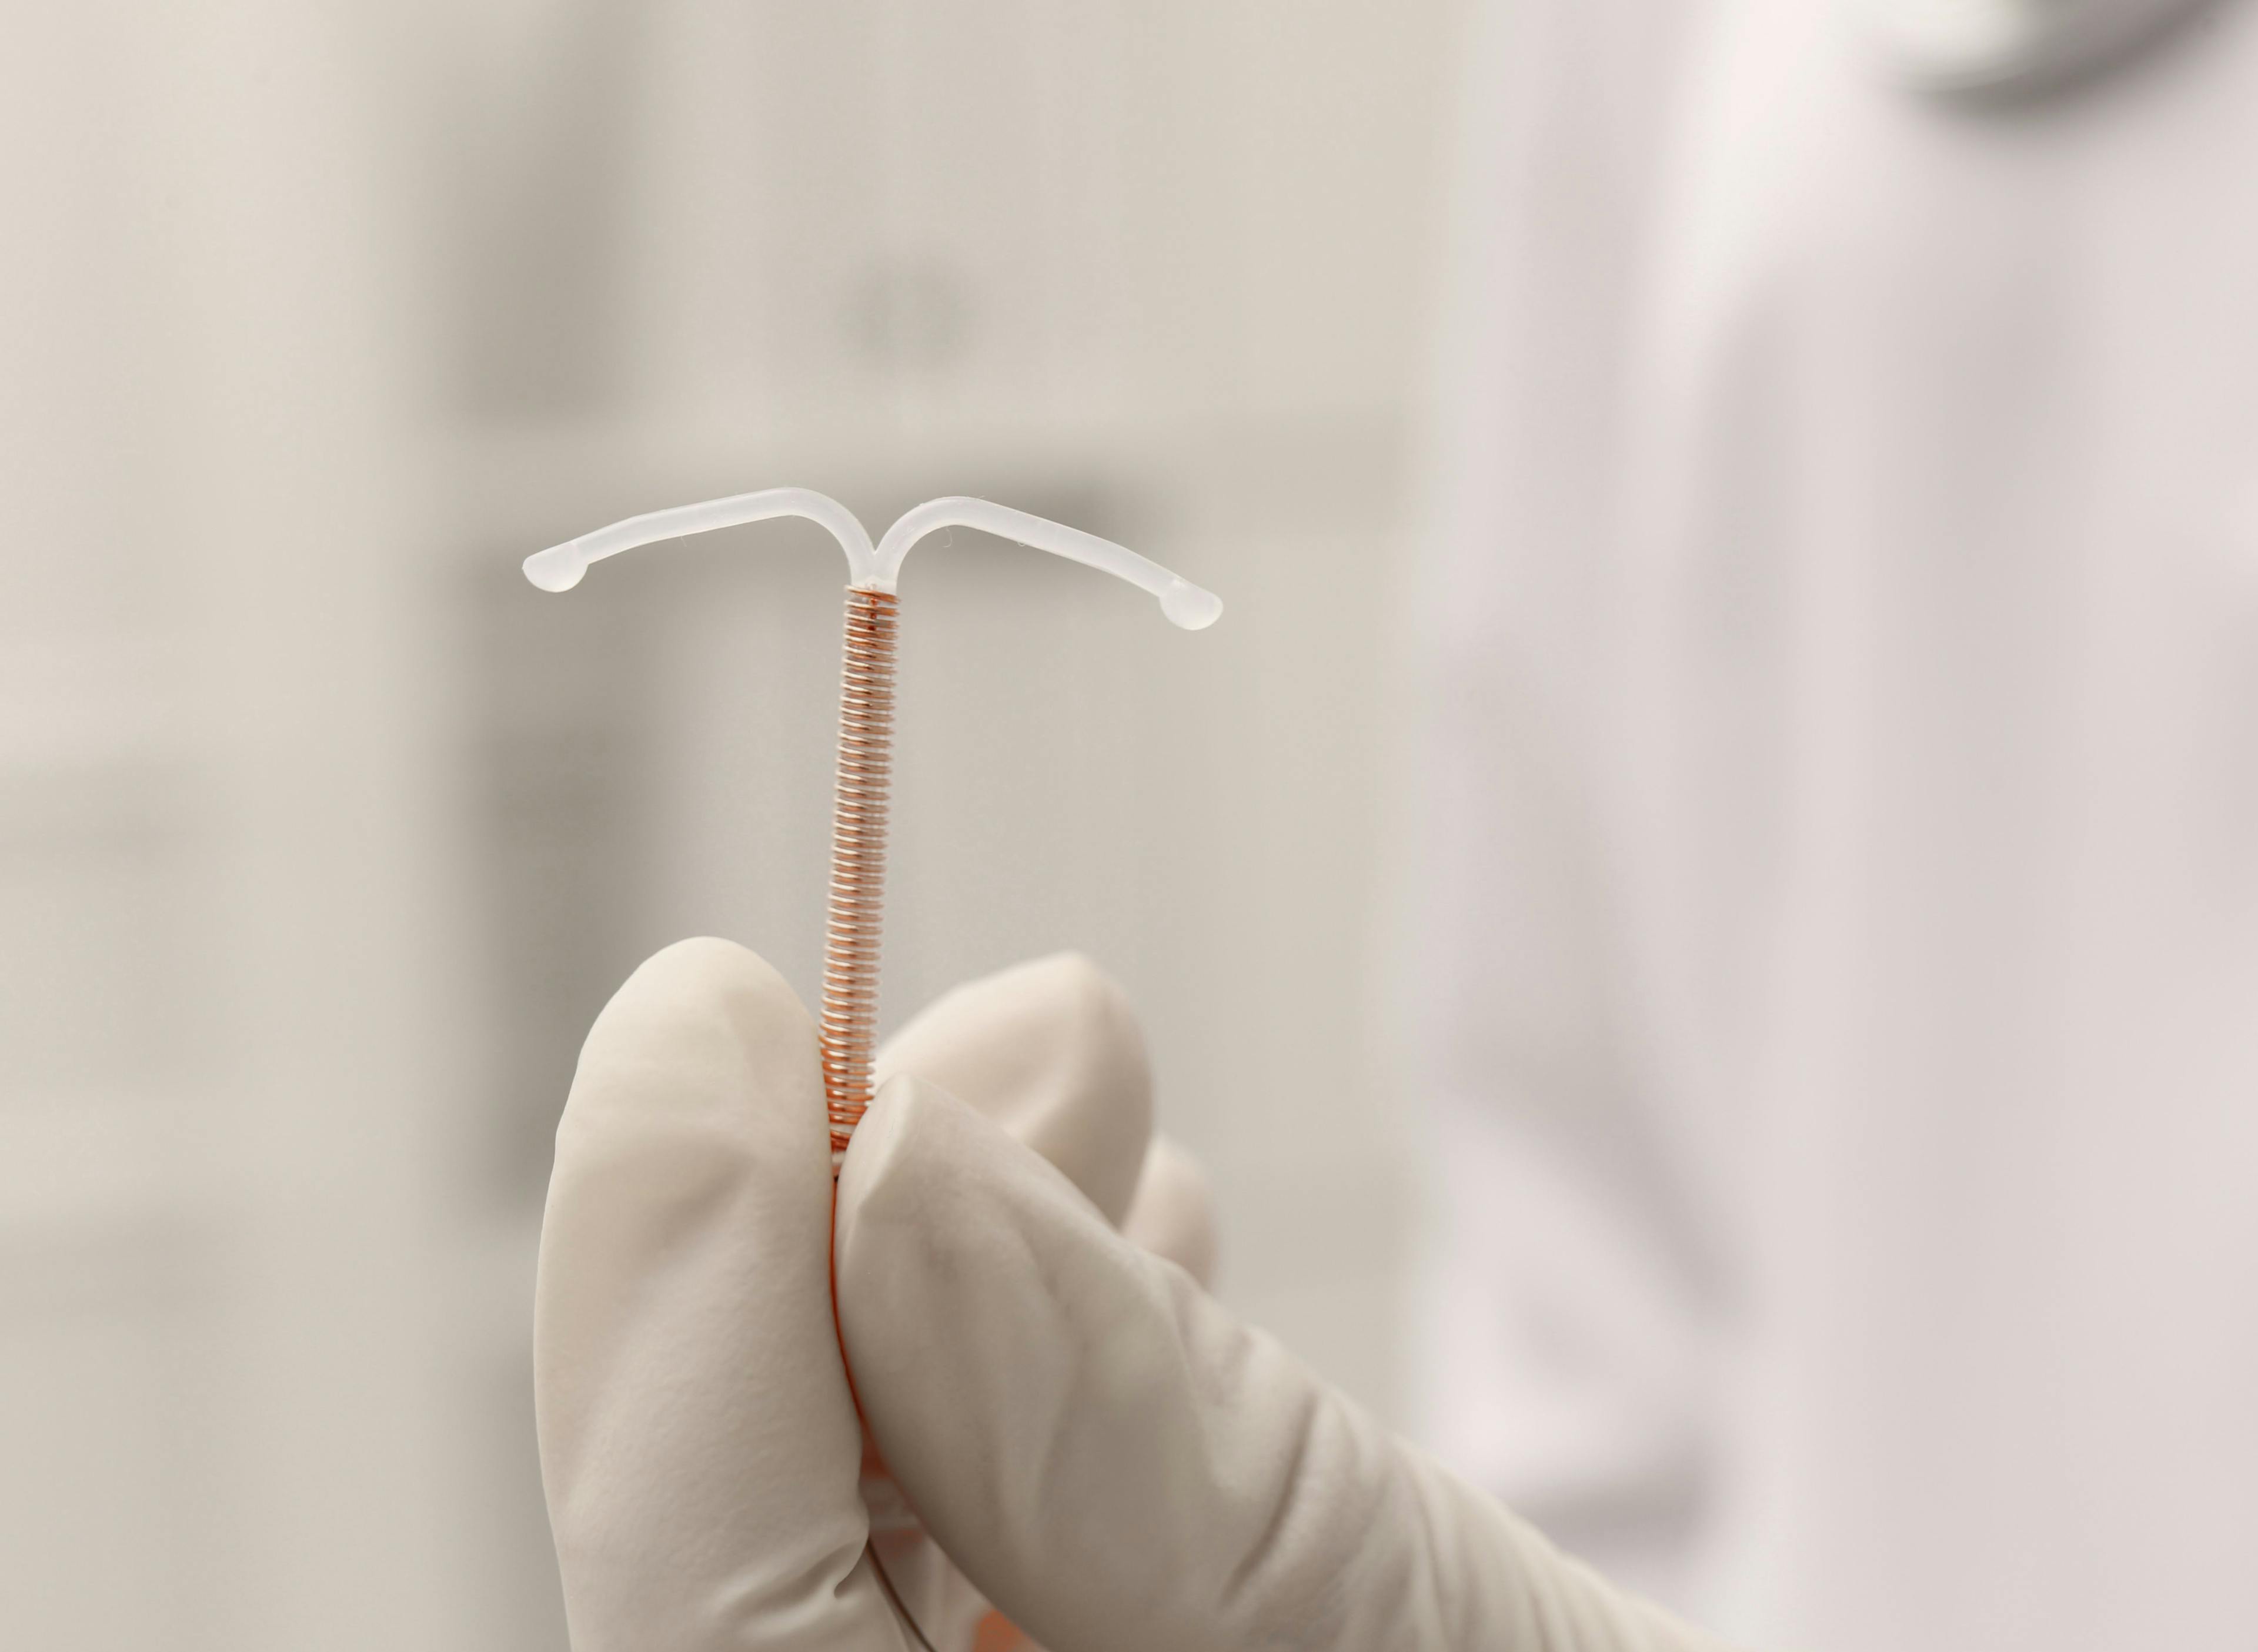 Virtual IUD placement training improves clinician confidence